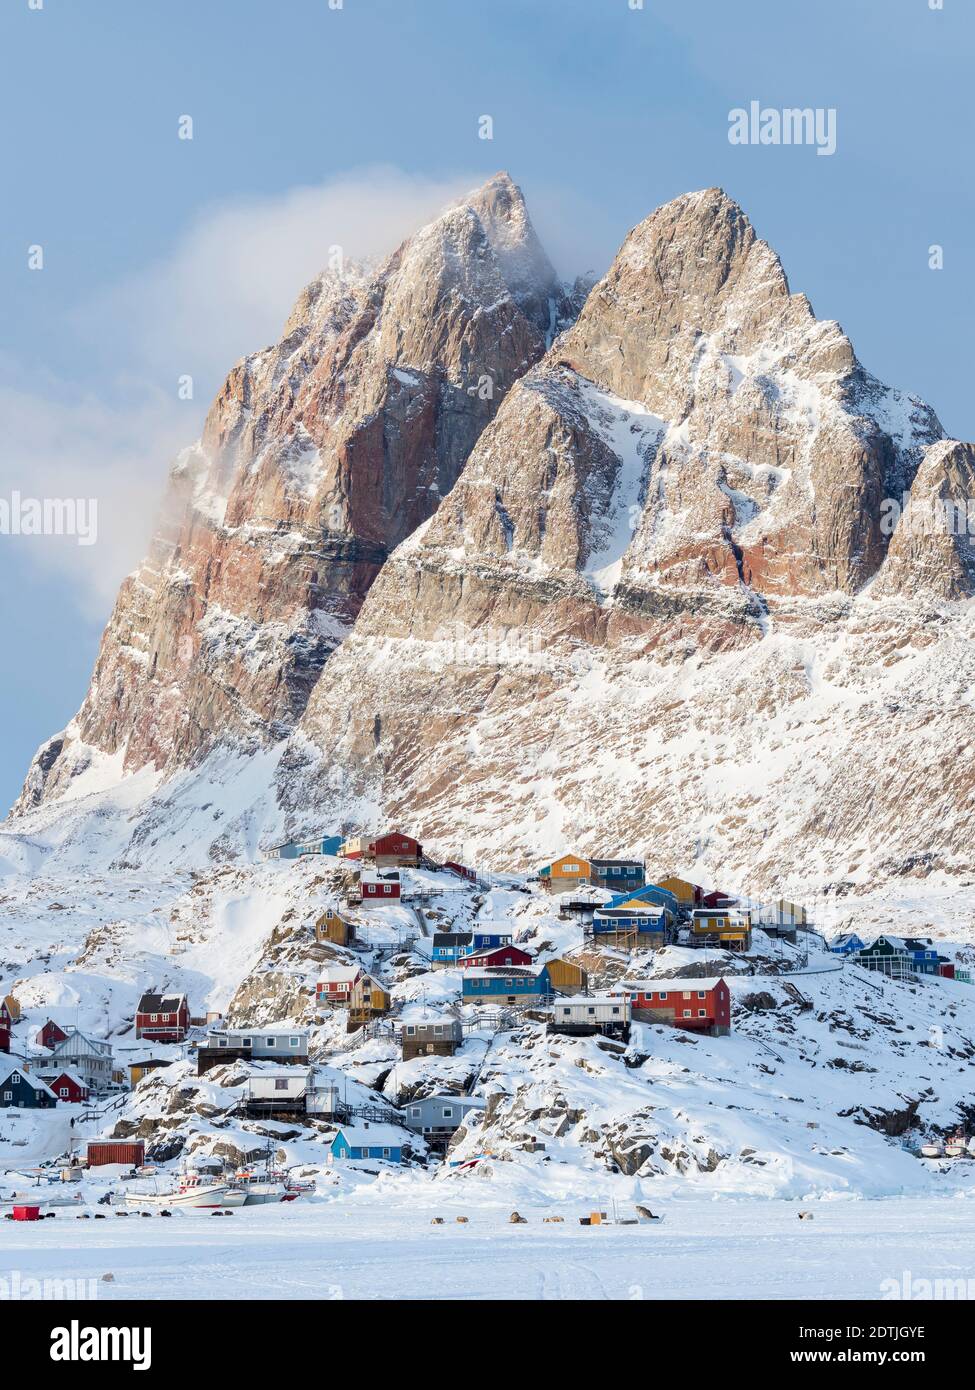 Town Uummannaq during winter in northern Greenland, seen from the frozen fjord. America, North America, Denmark, Greenland Stock Photo